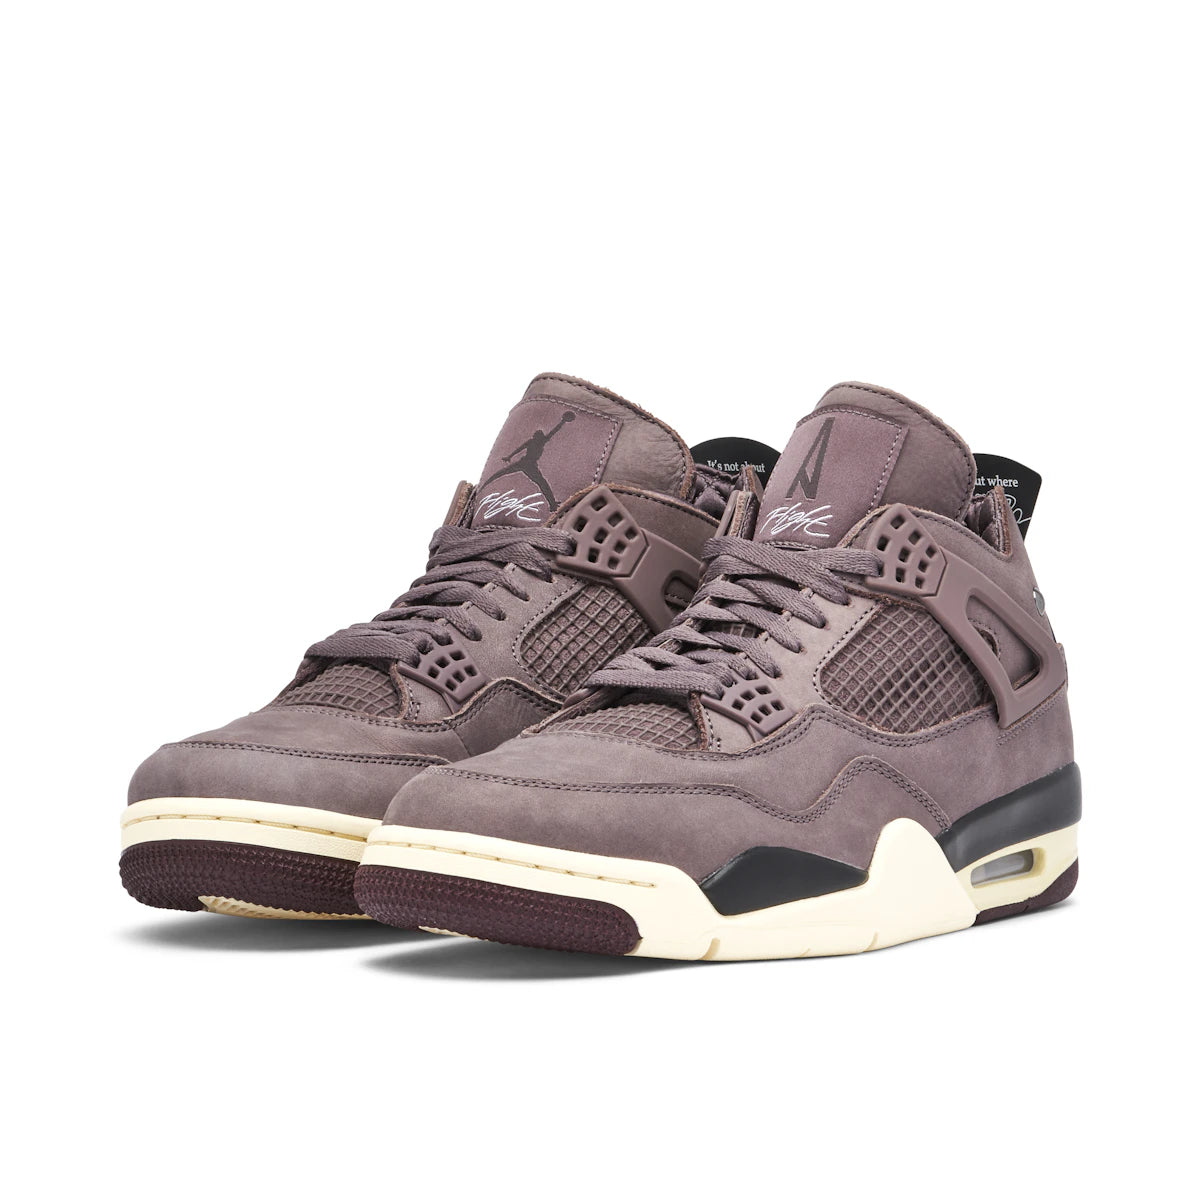 Jordan 4 Retro A Ma Maniére Violet Ore by Jordan's from £353.00